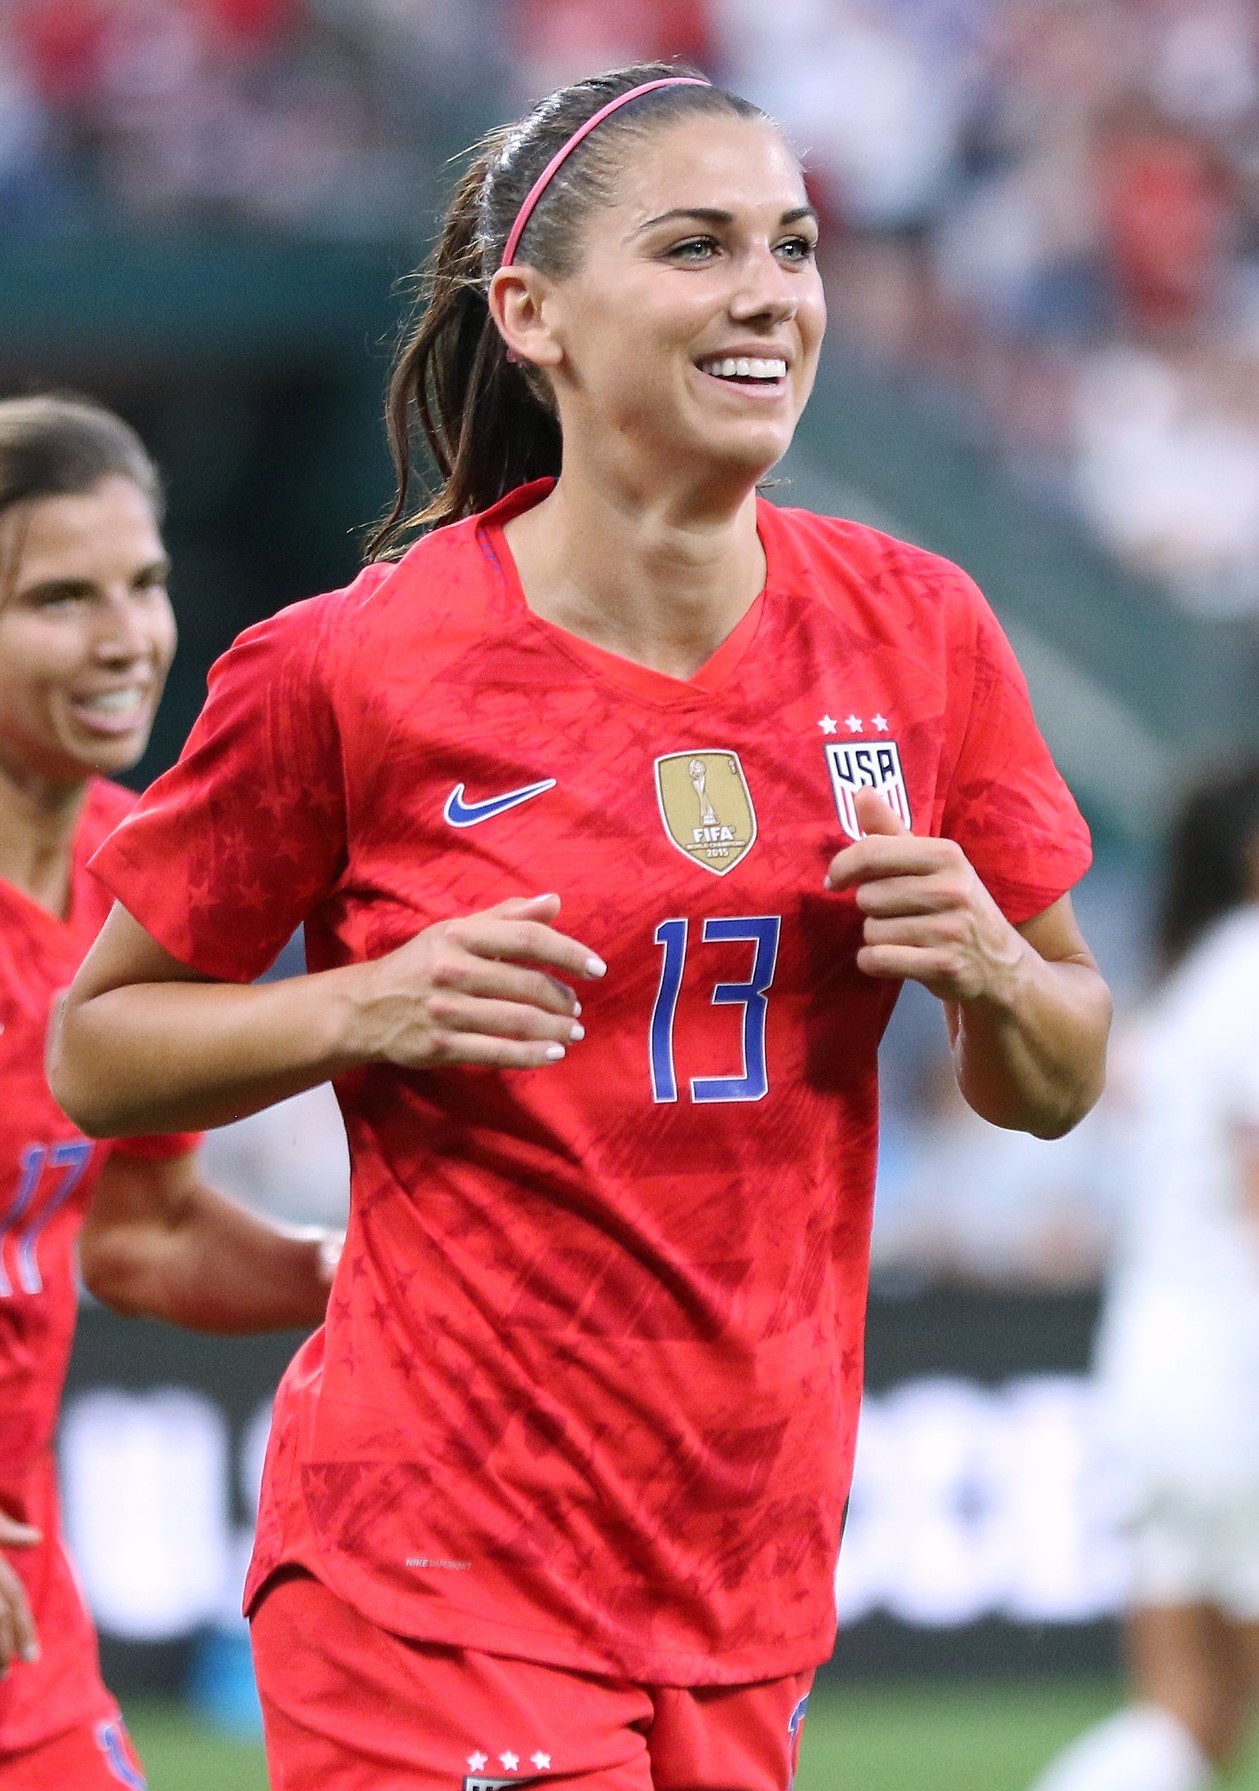 Alex Morgan during the USWNT friendly against New Zealand on May 16, 2019, in St. Louis